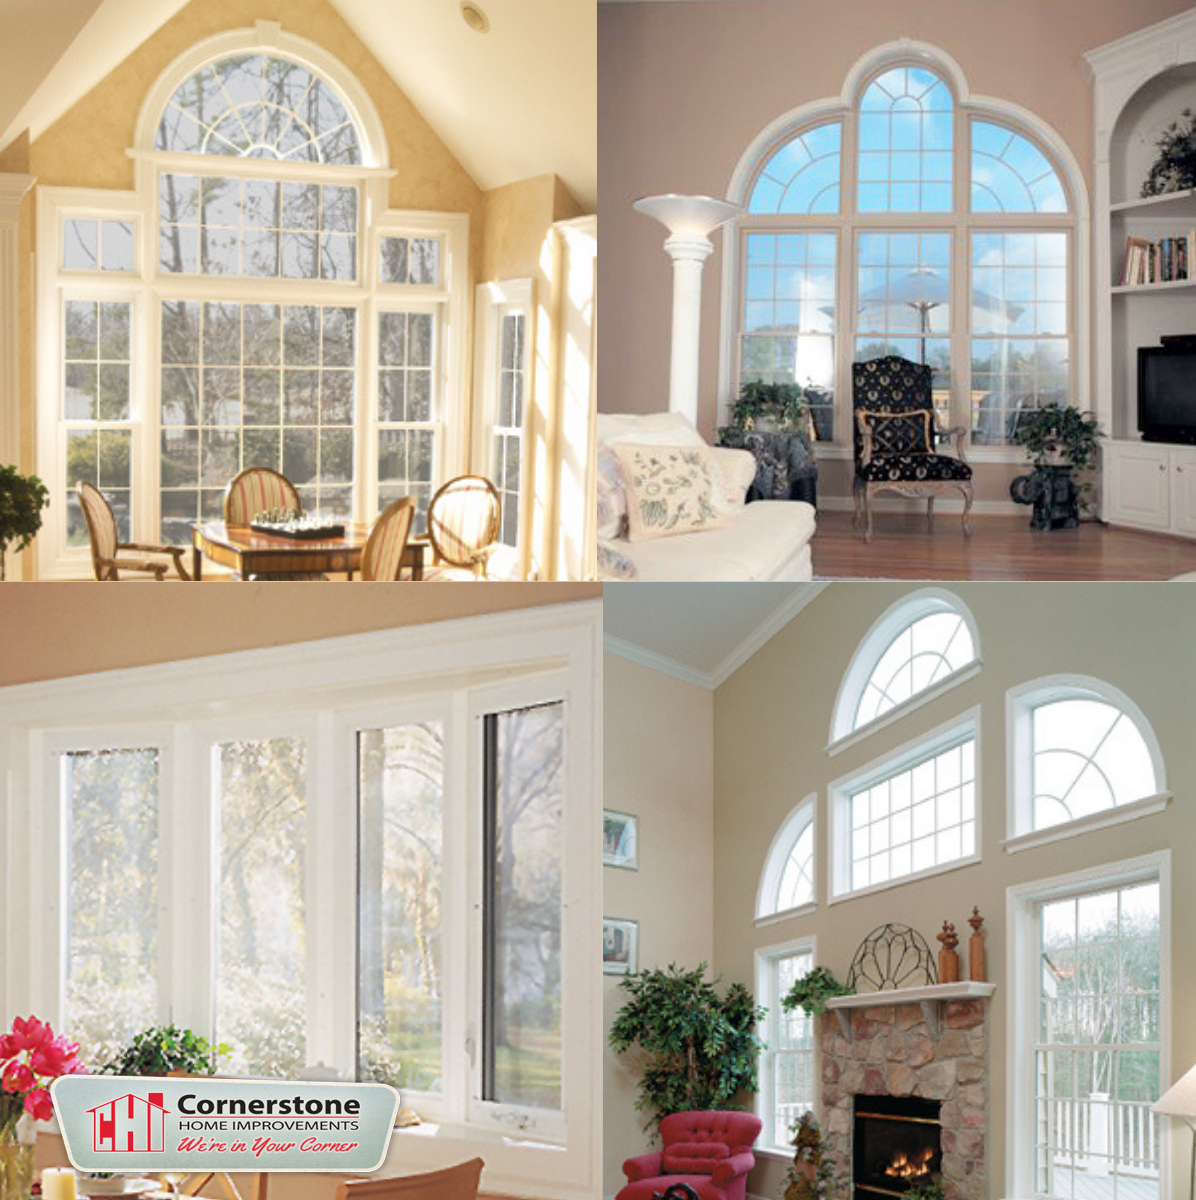 Showing Energy-Efficient Windows in living room and dining rooms.